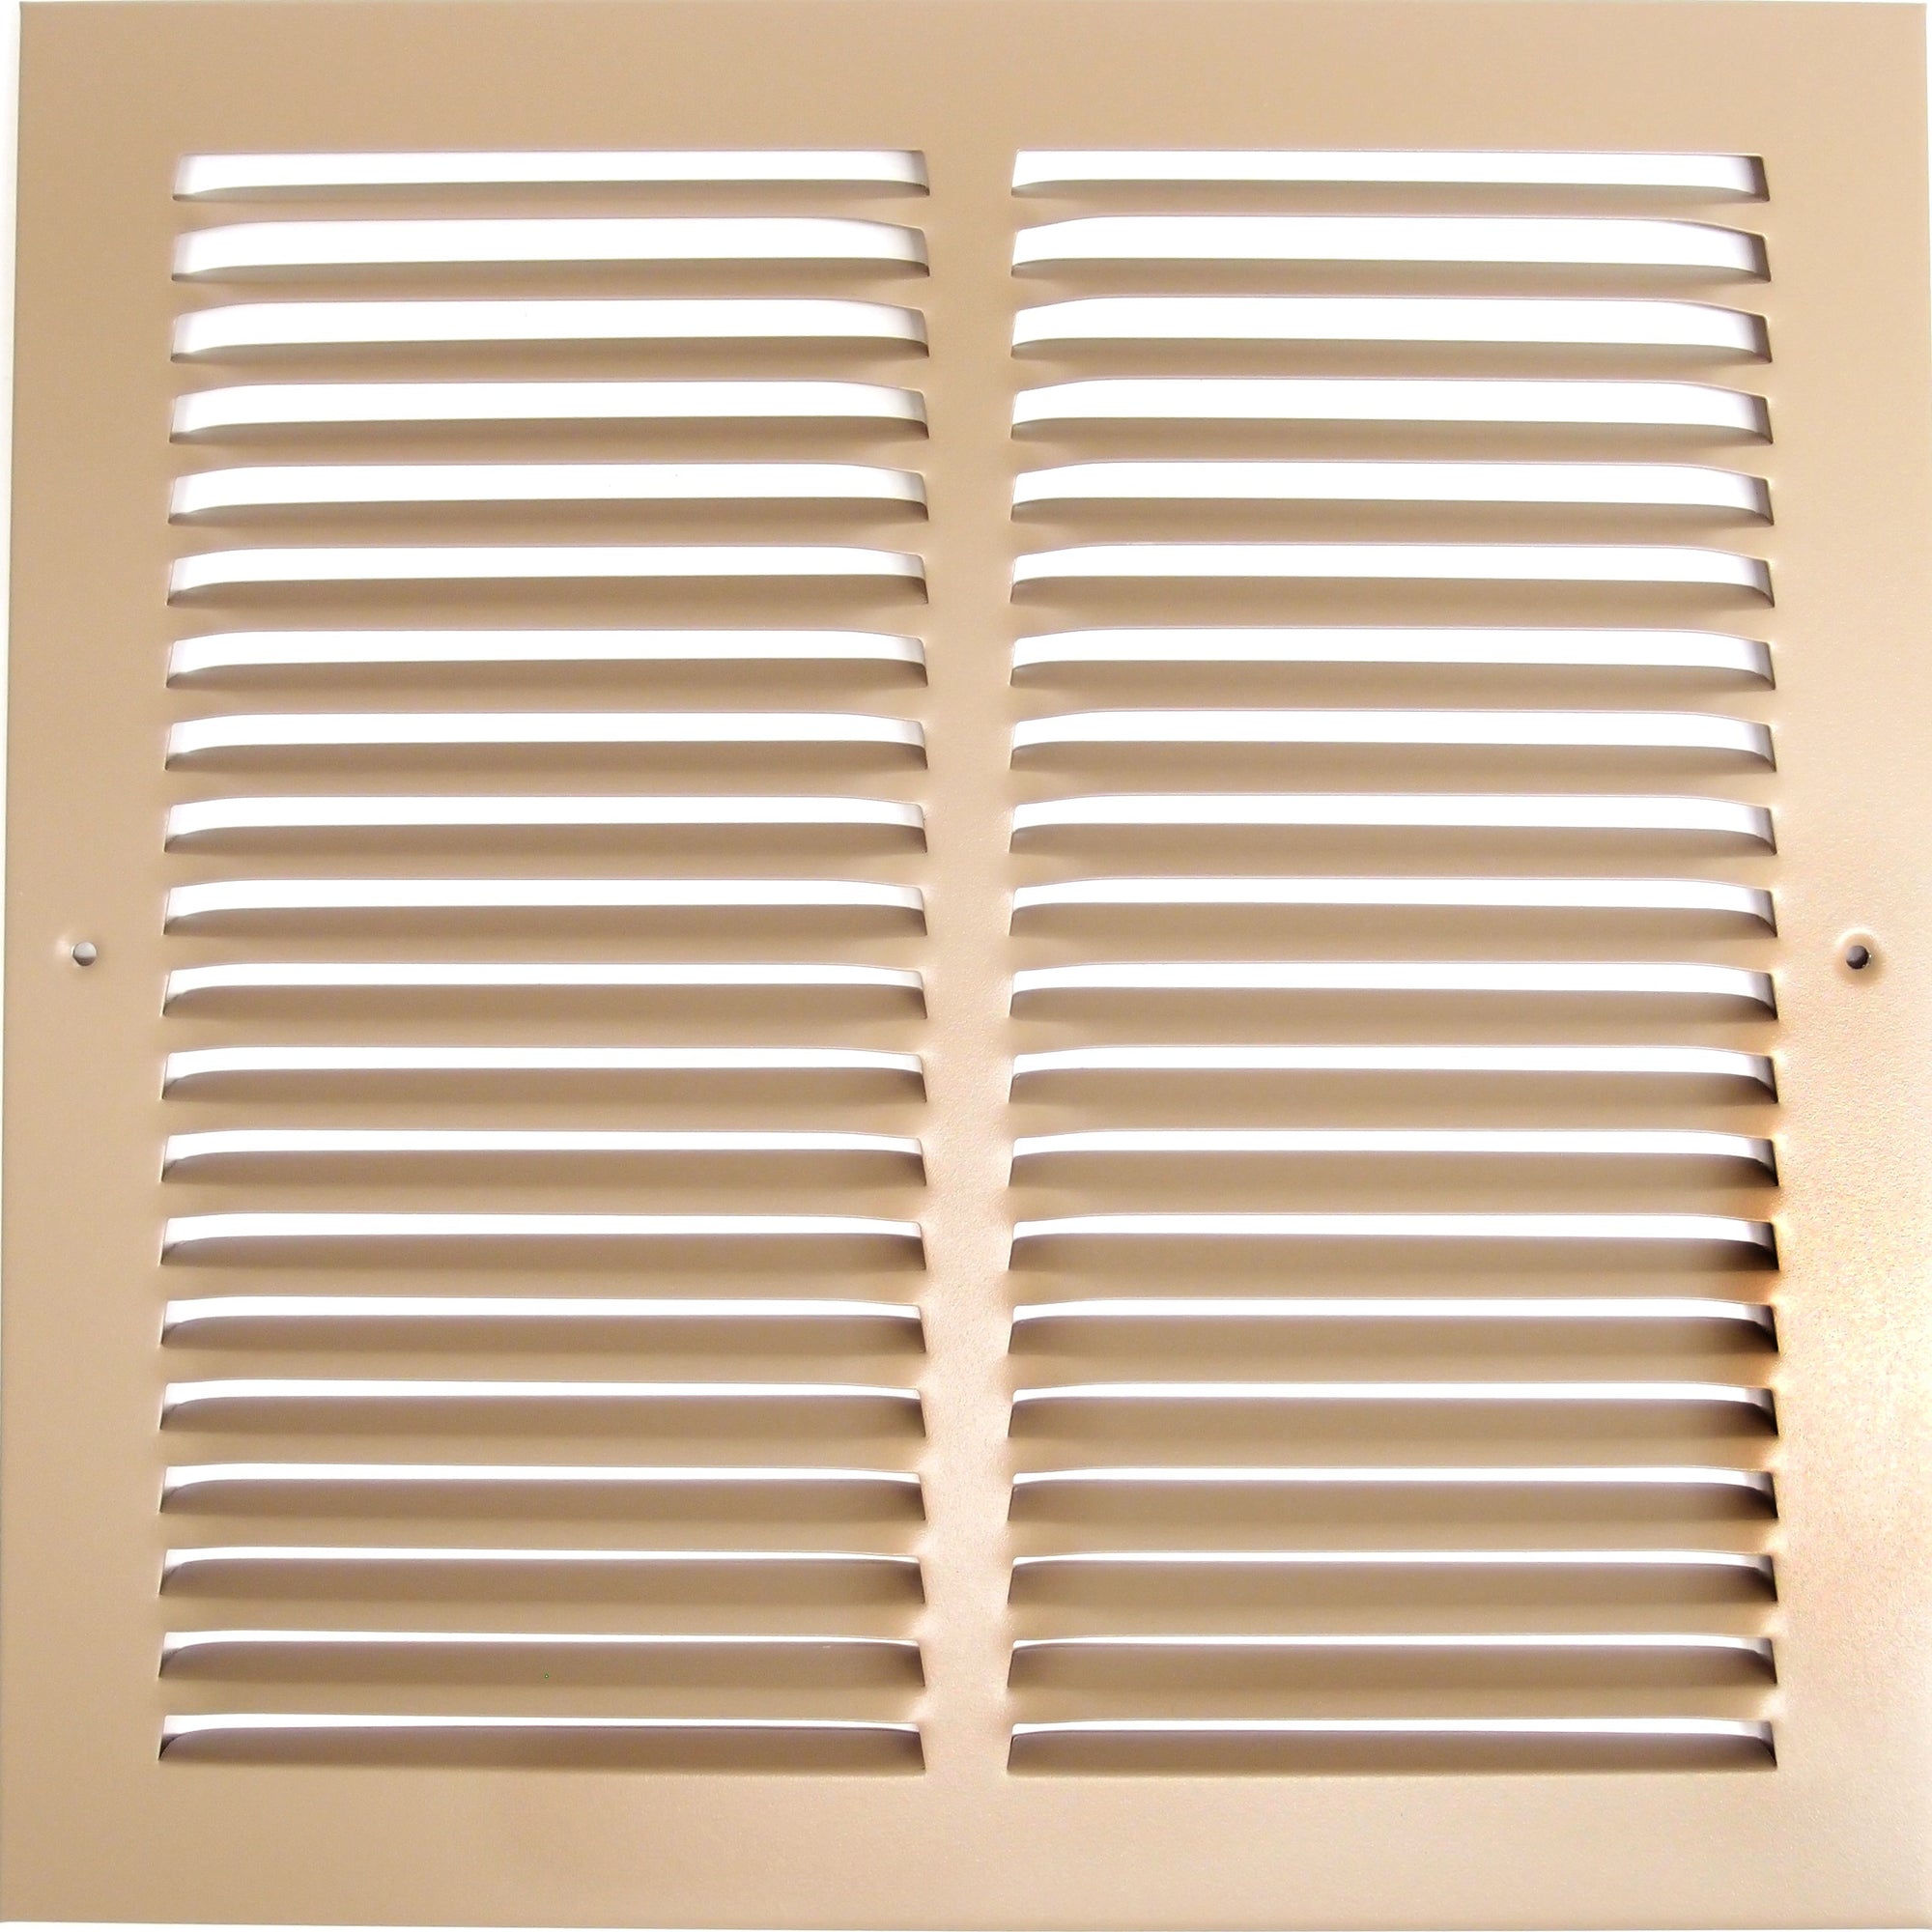 12" X 12" Air Vent Return Grilles - Sidewall and Ceiling - Steel